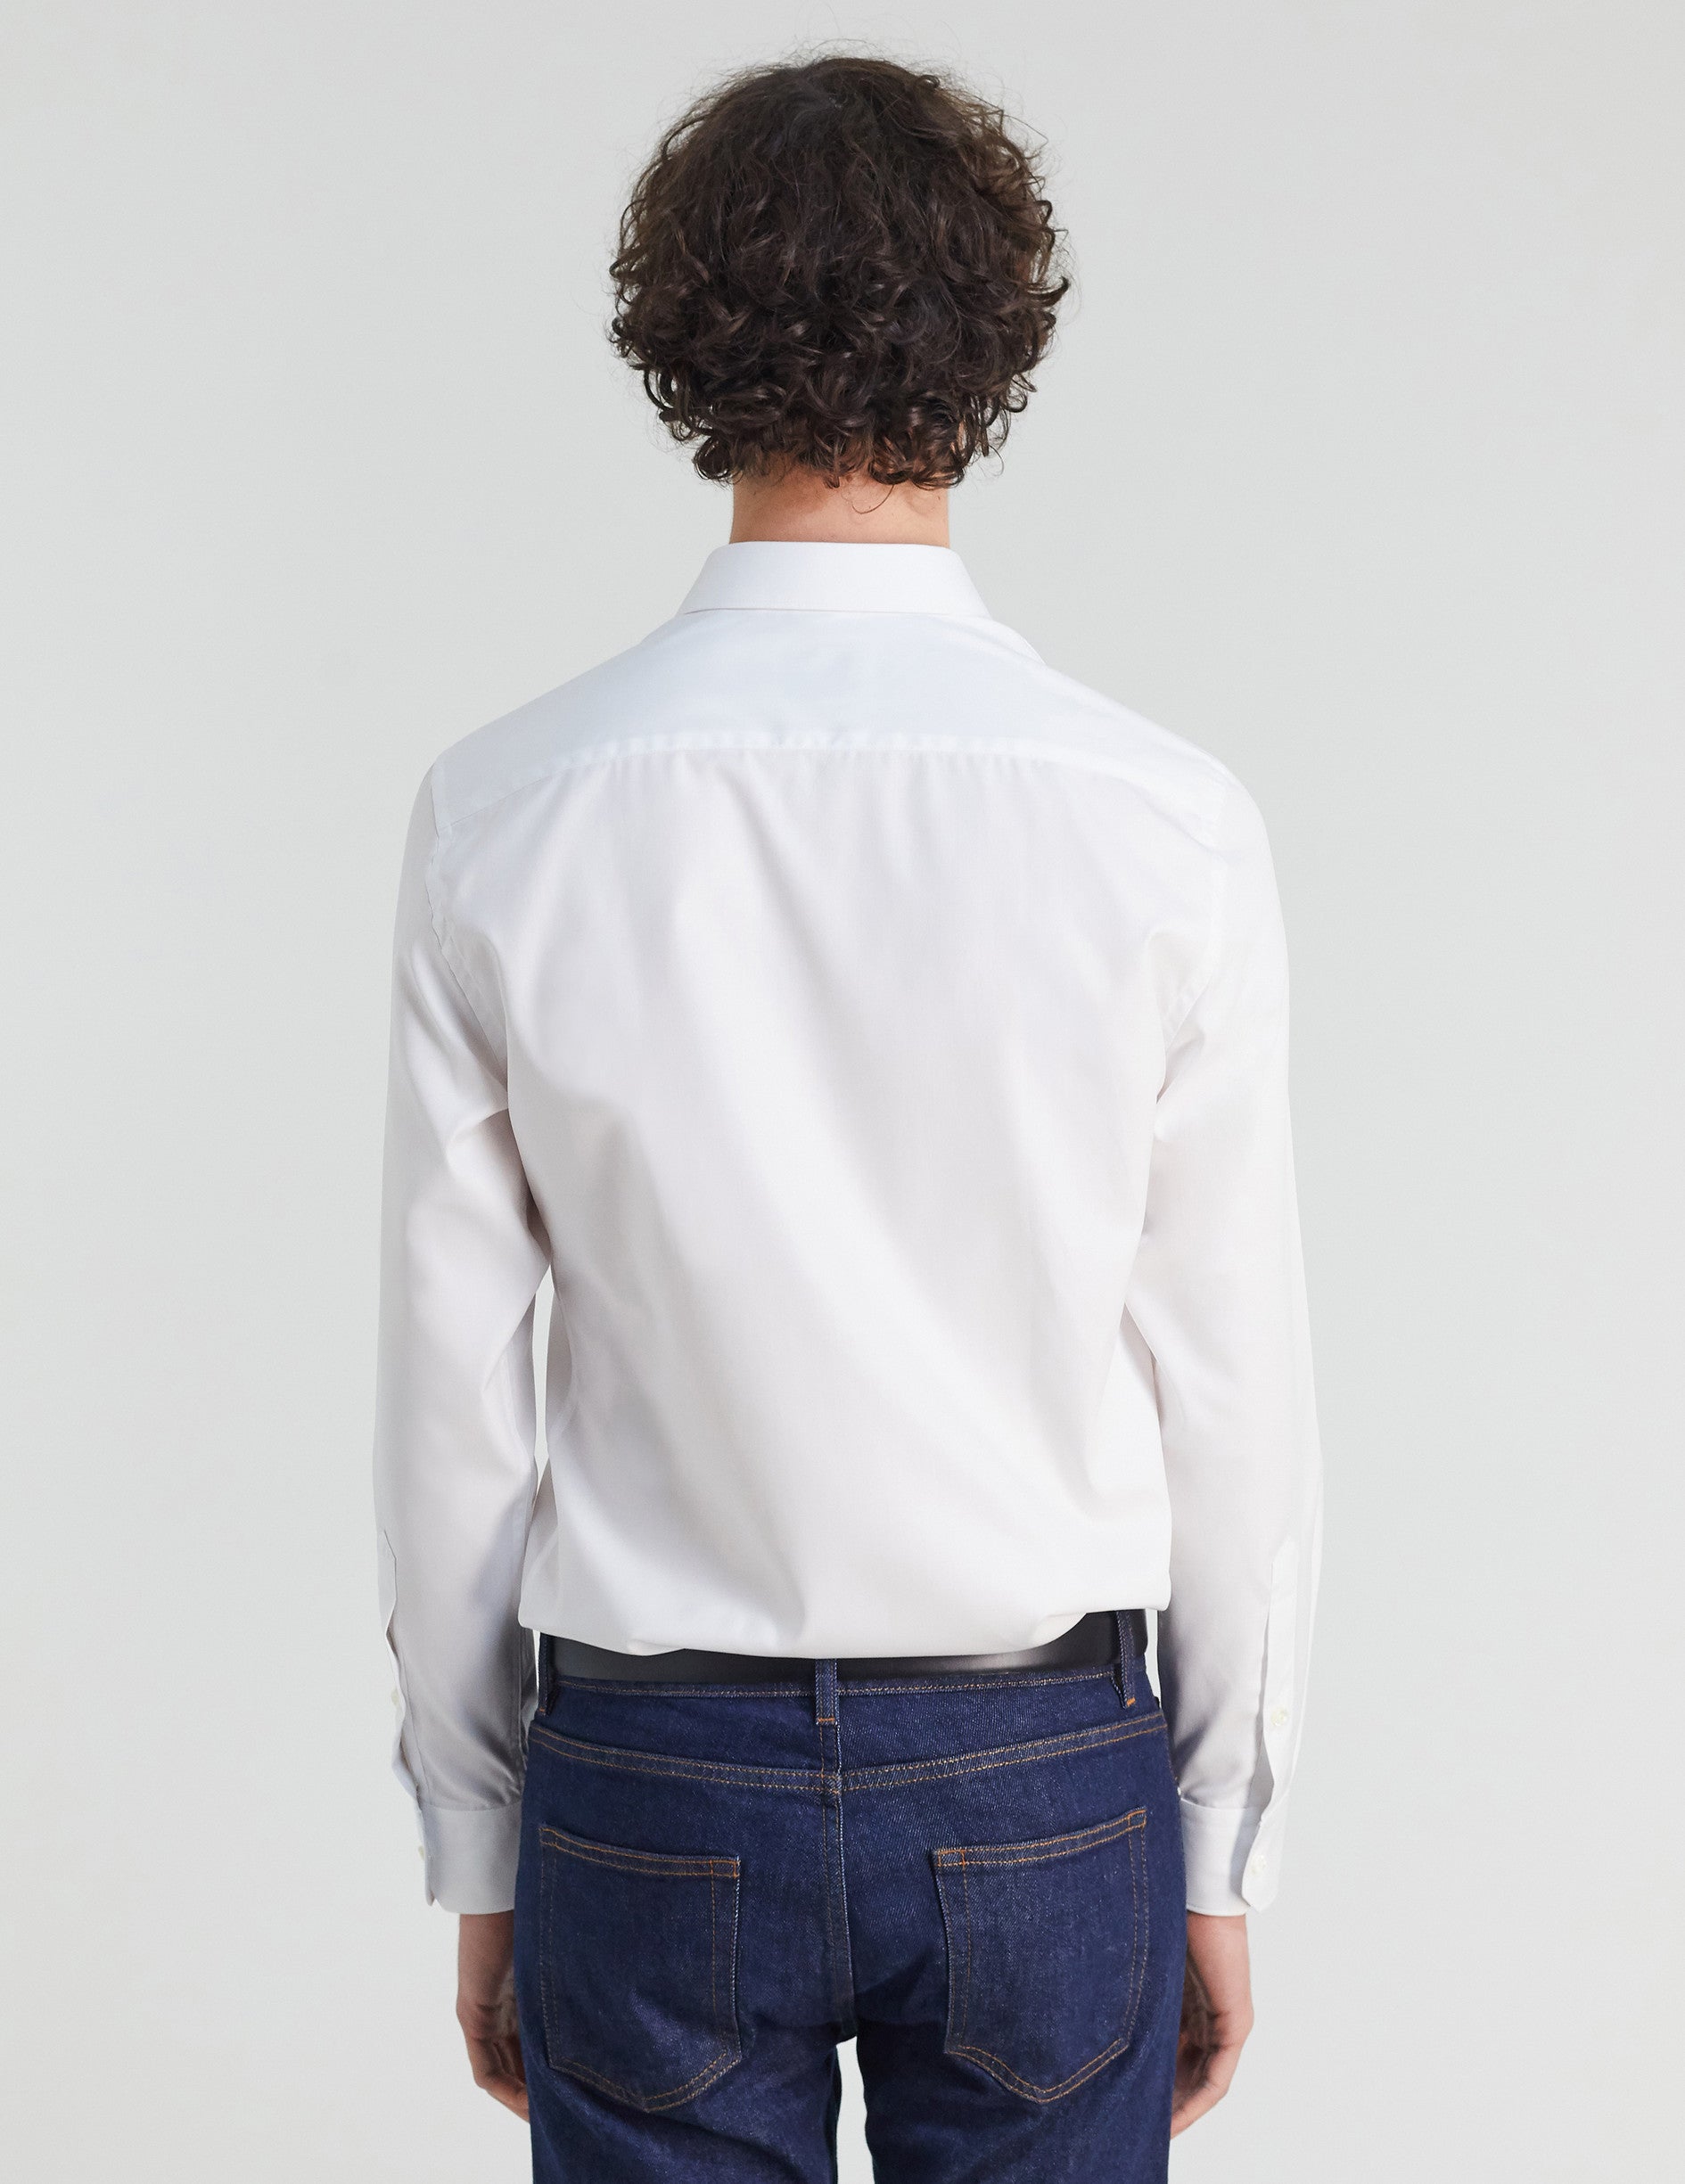 Fitted white shirt - pin point - Figaret Collar